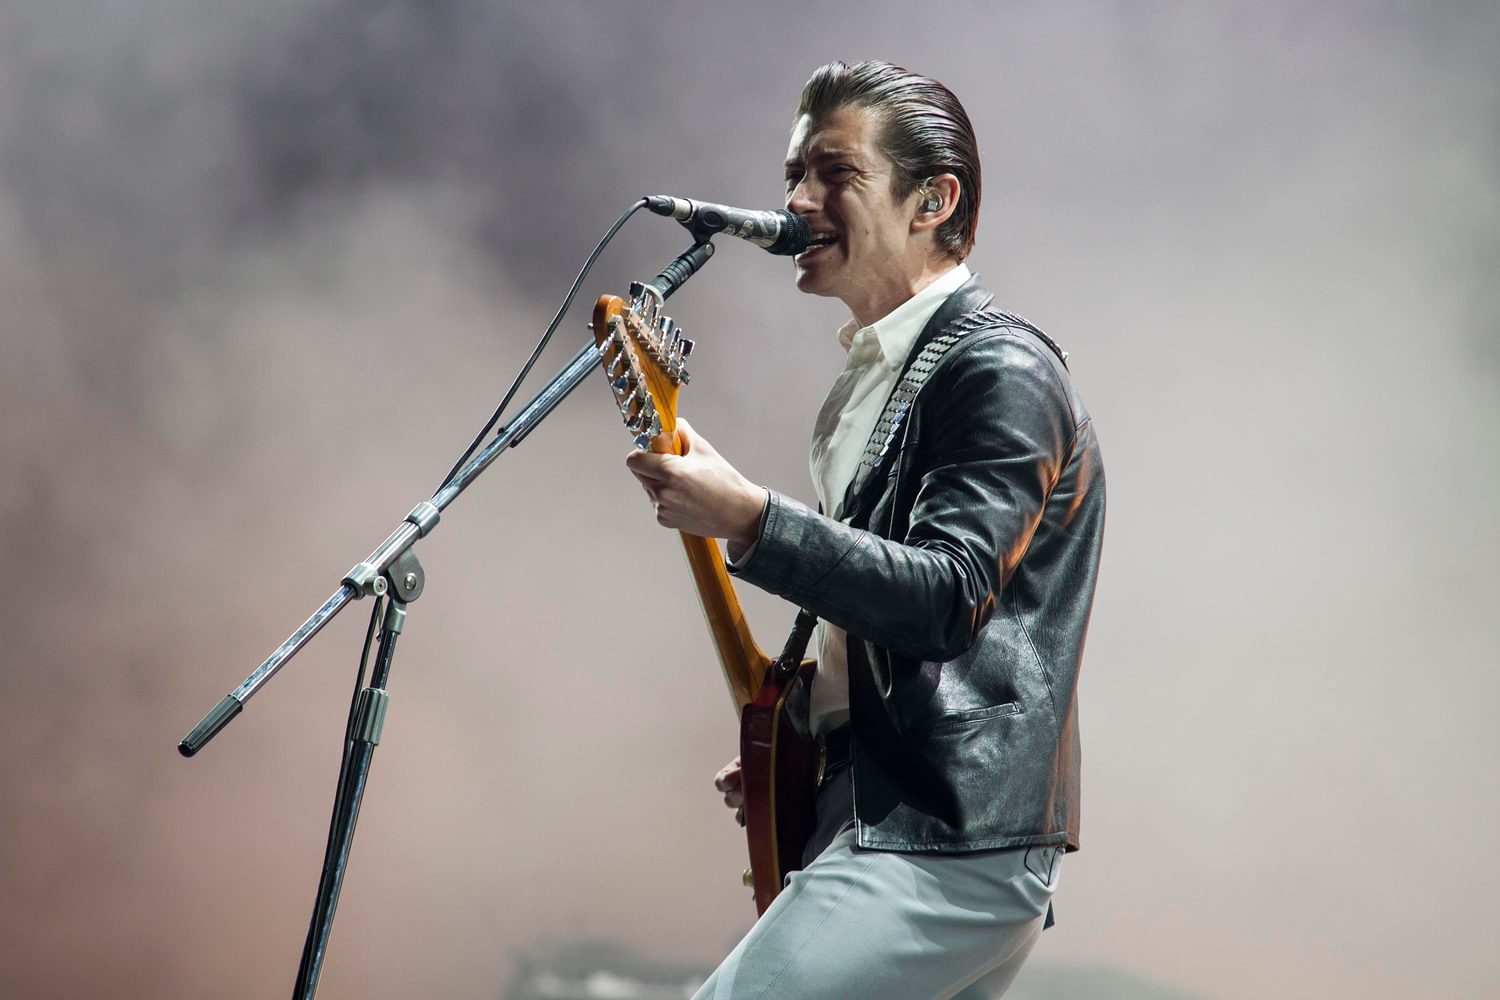 Watch Arctic Monkeys play first European show in four years